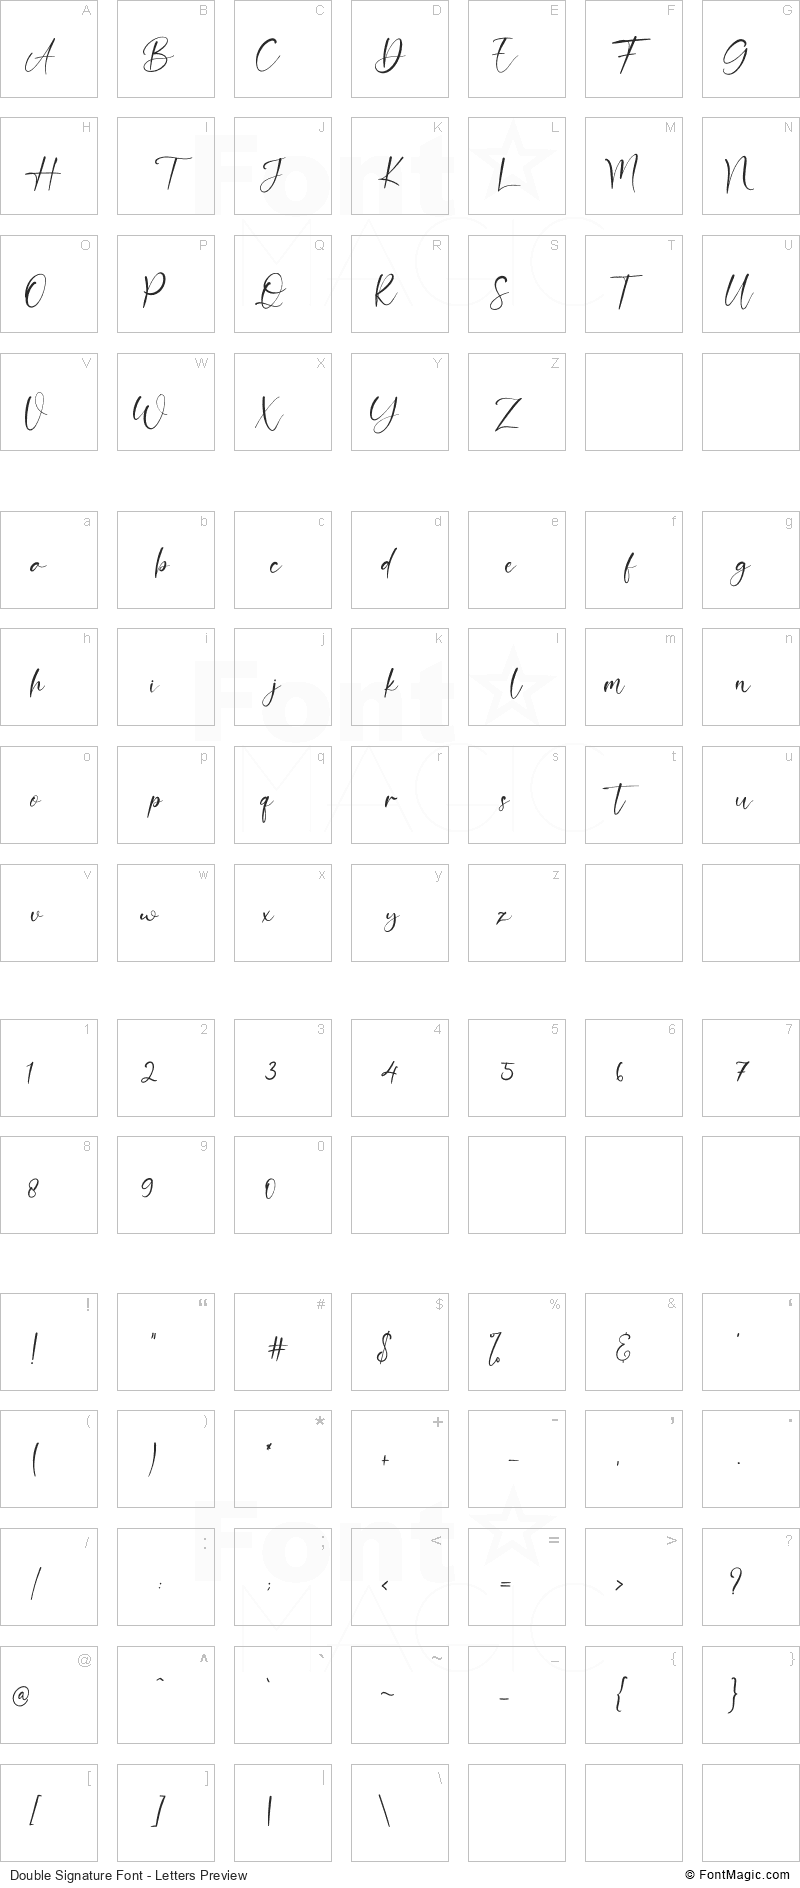 Double Signature Font - All Latters Preview Chart